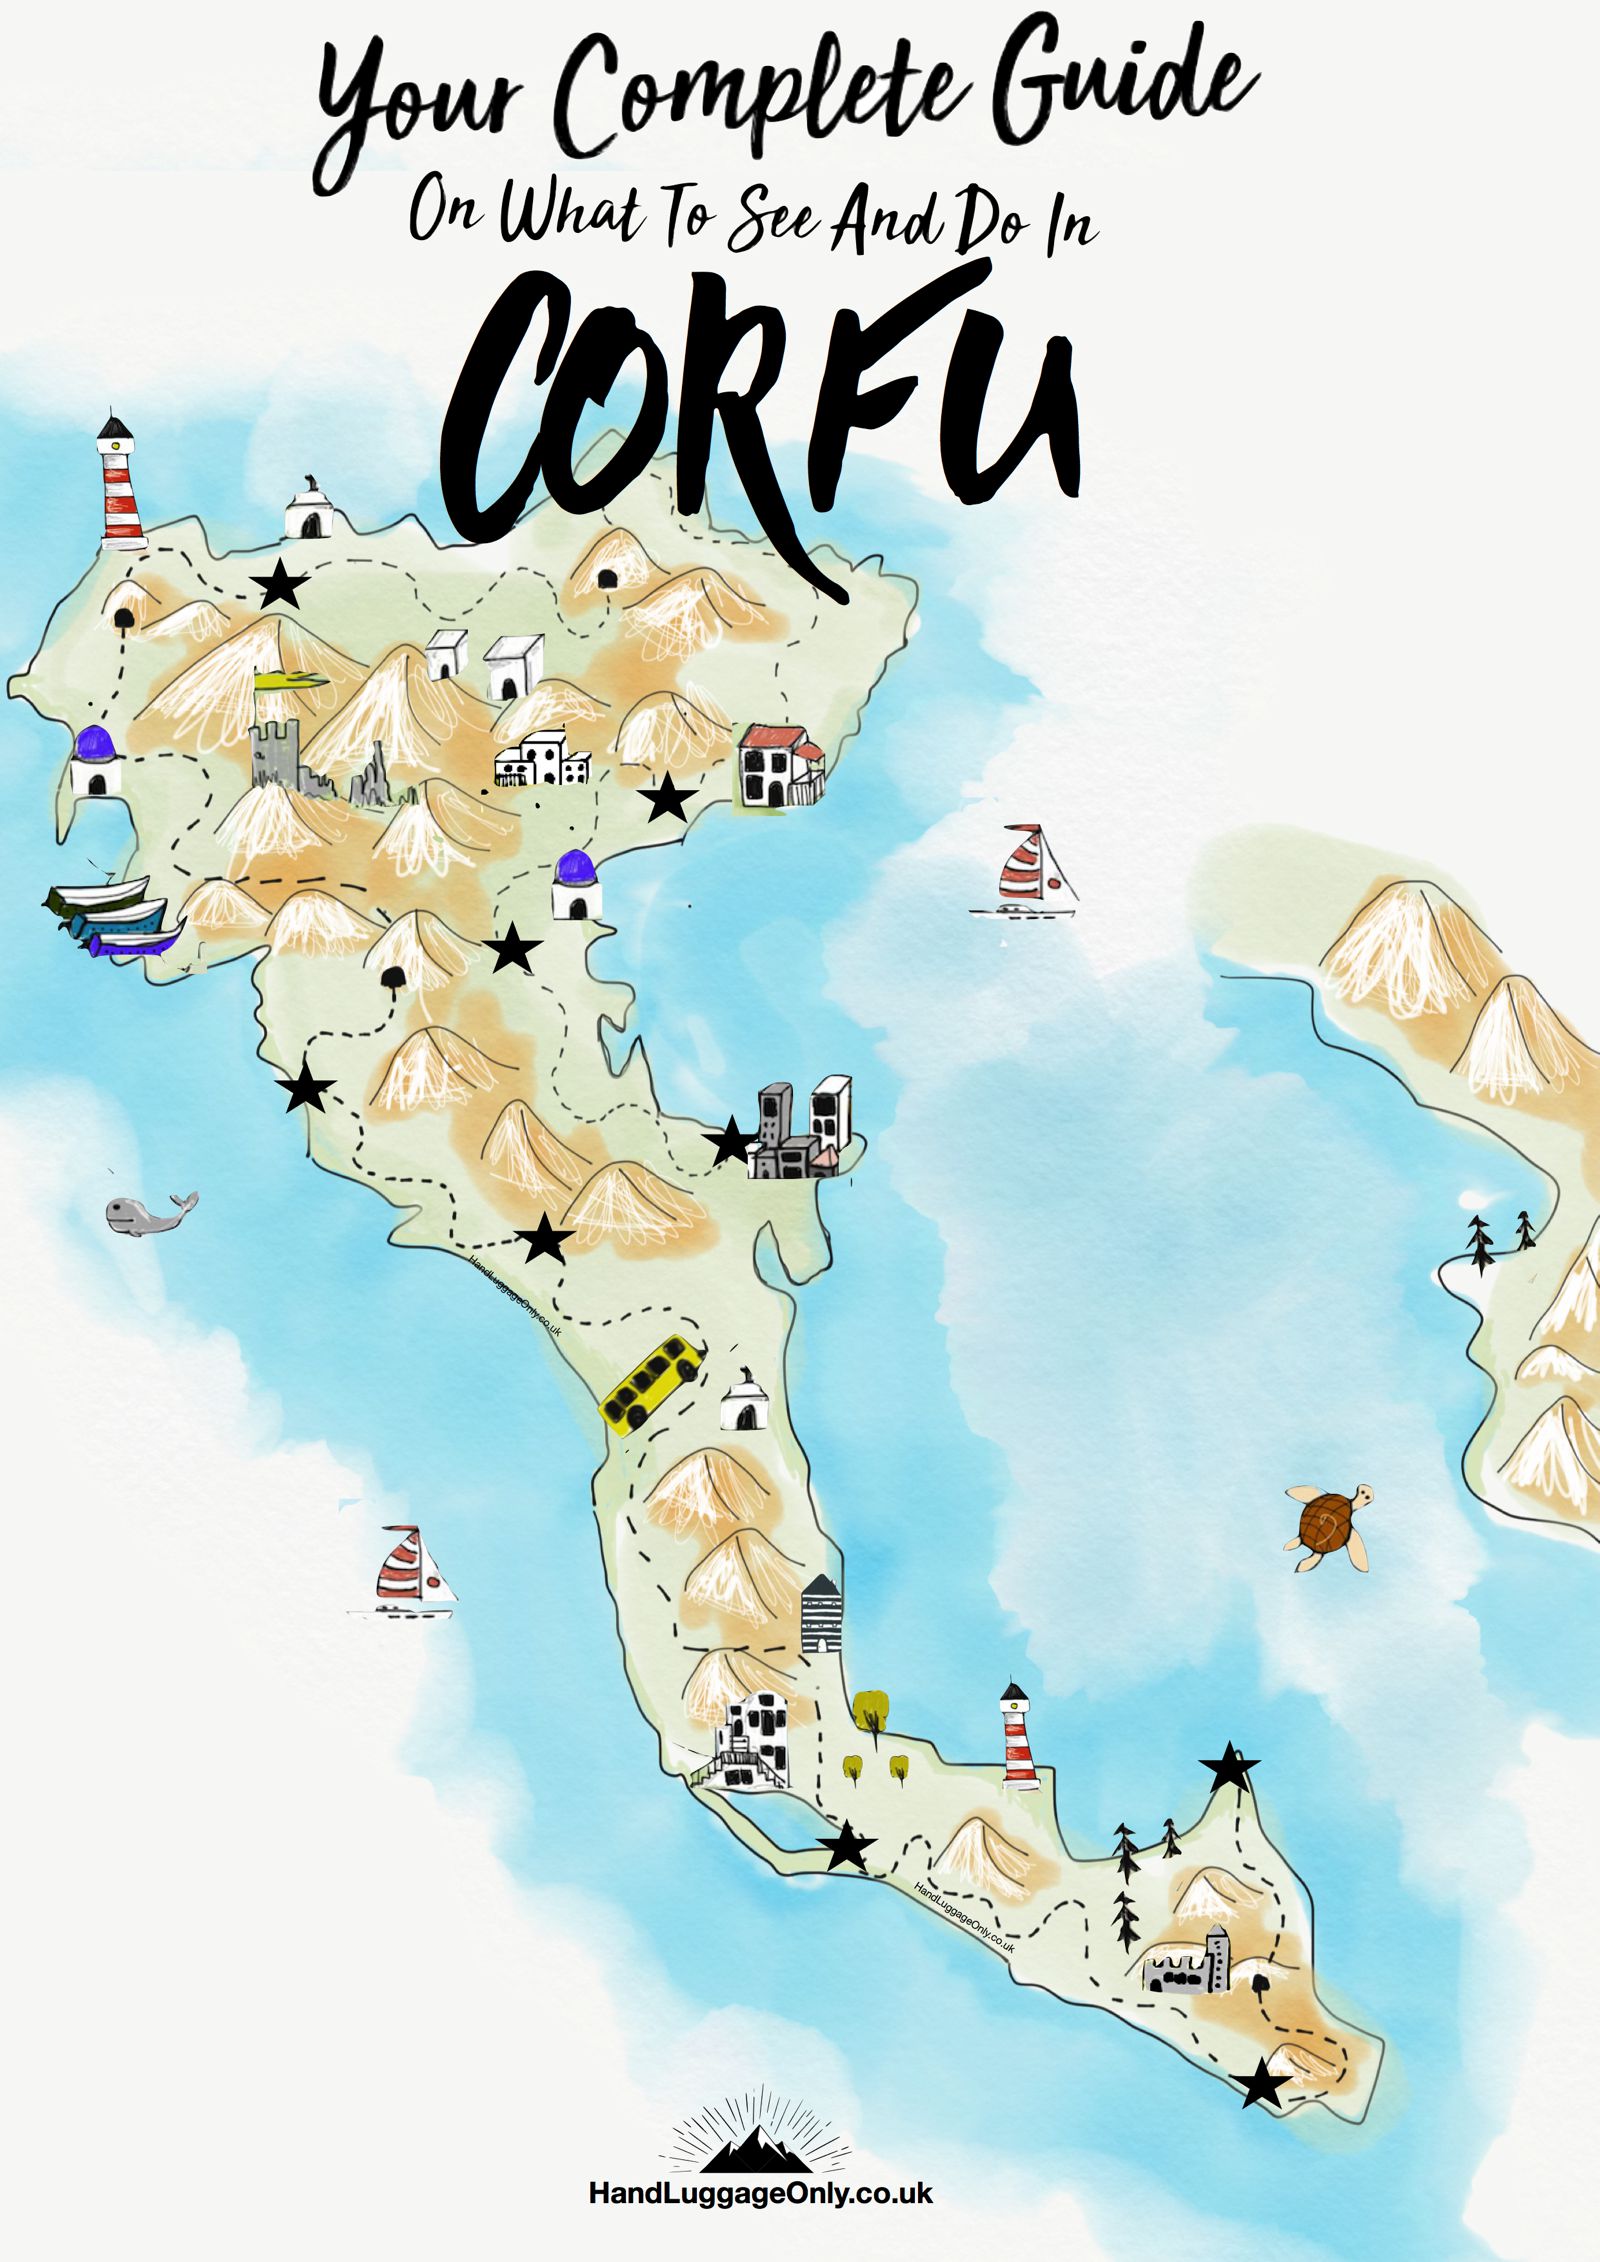 11 Best Things To Do In Corfu, Greece - Hand Luggage Only - Travel